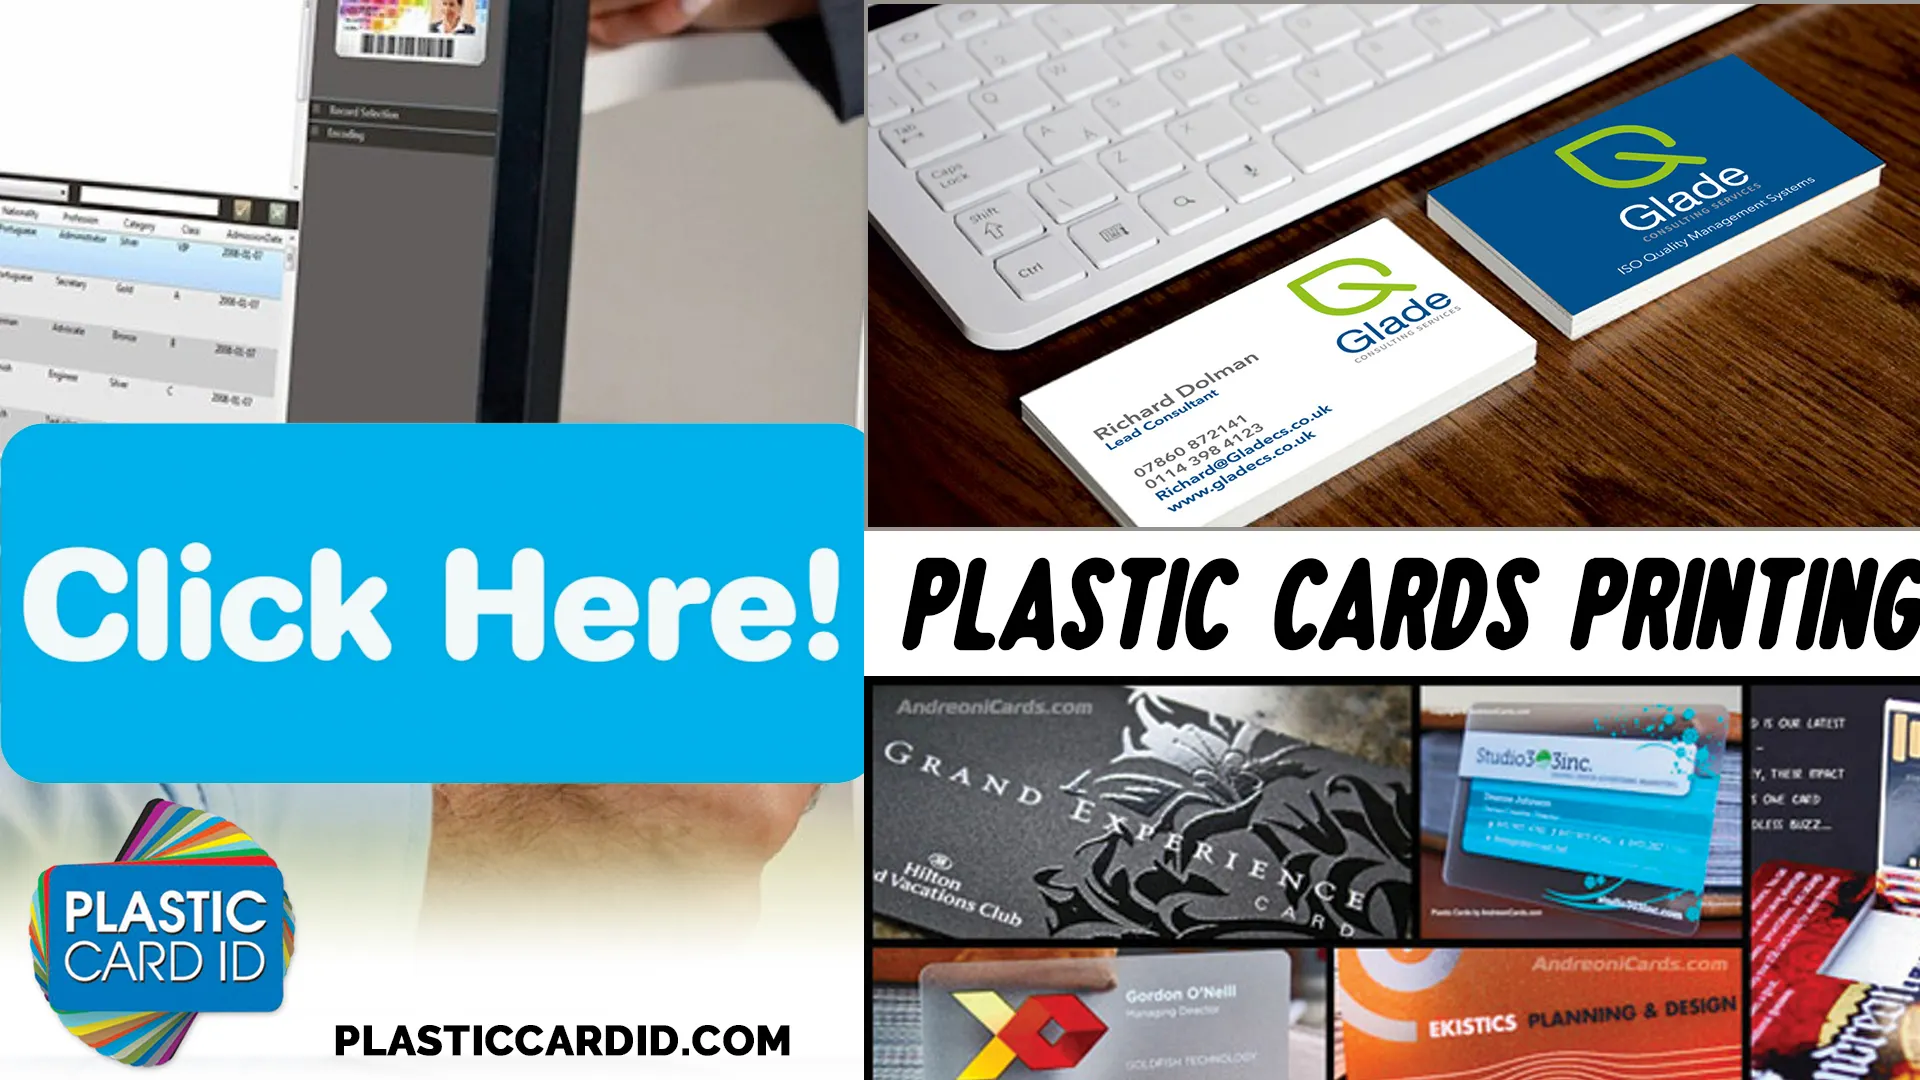 Considerations for Biodegradable Plastic Cards